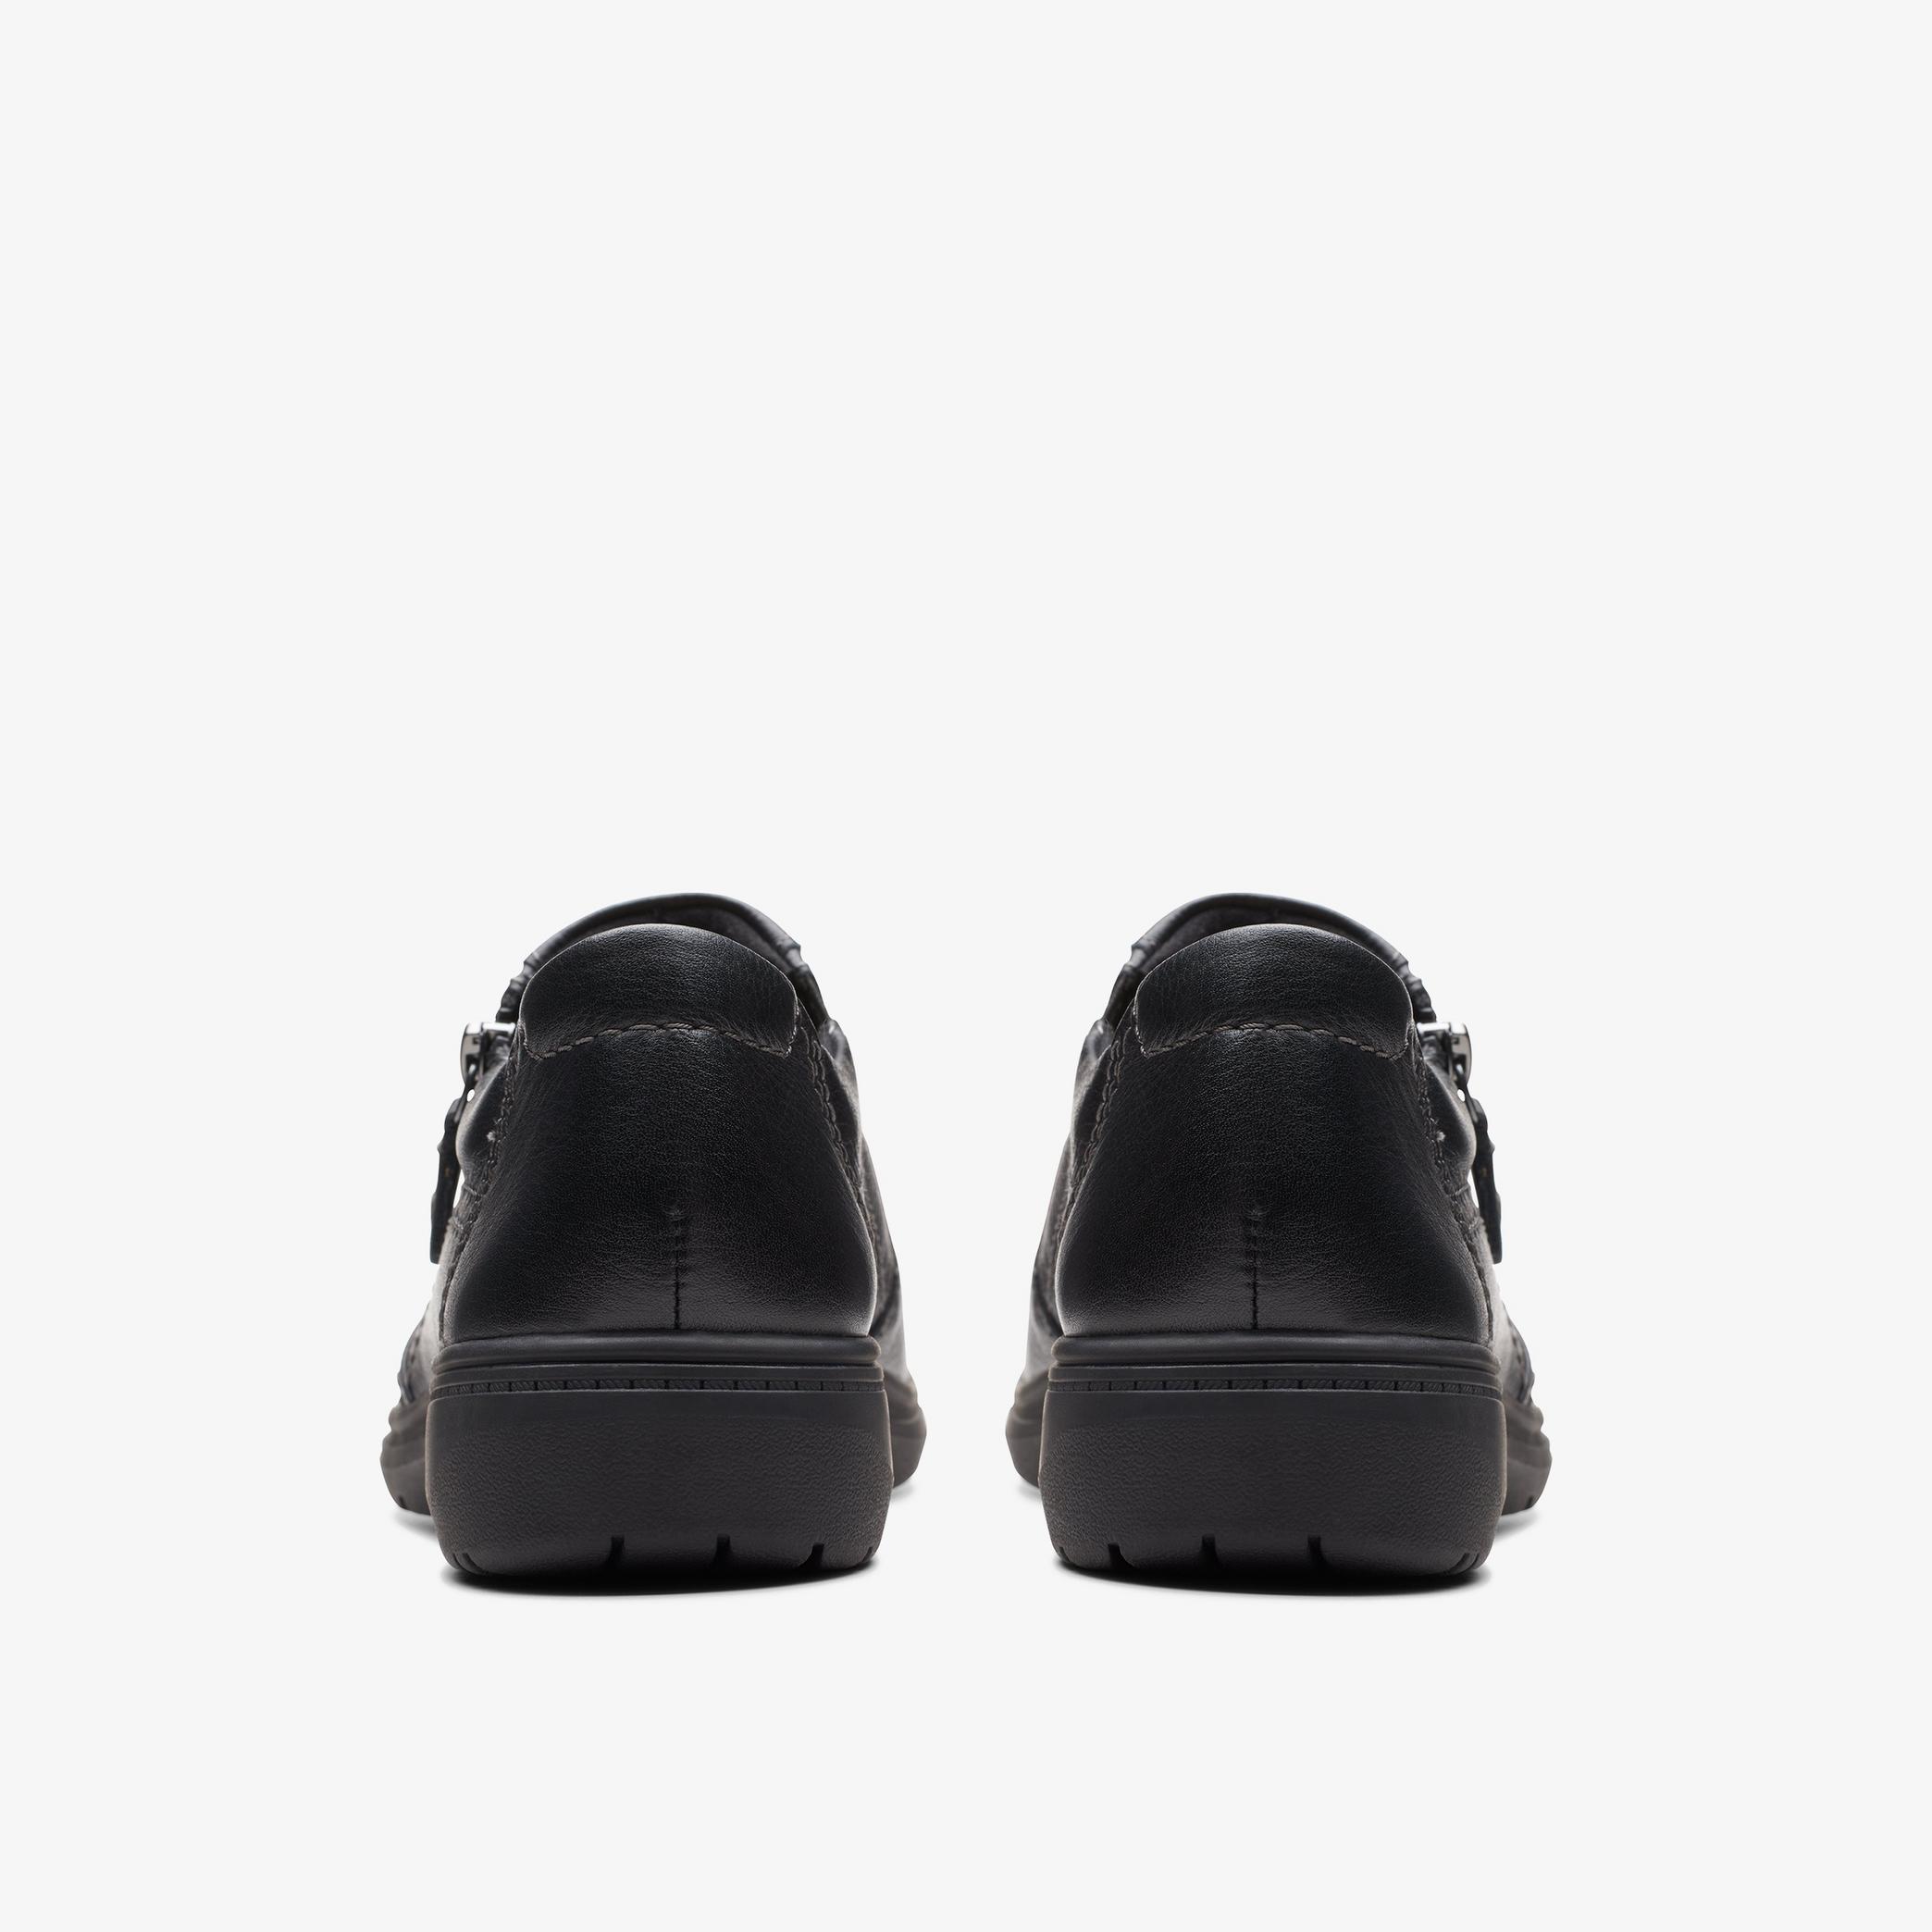 Carleigh Ray Black Leather Slip Ons, view 5 of 6